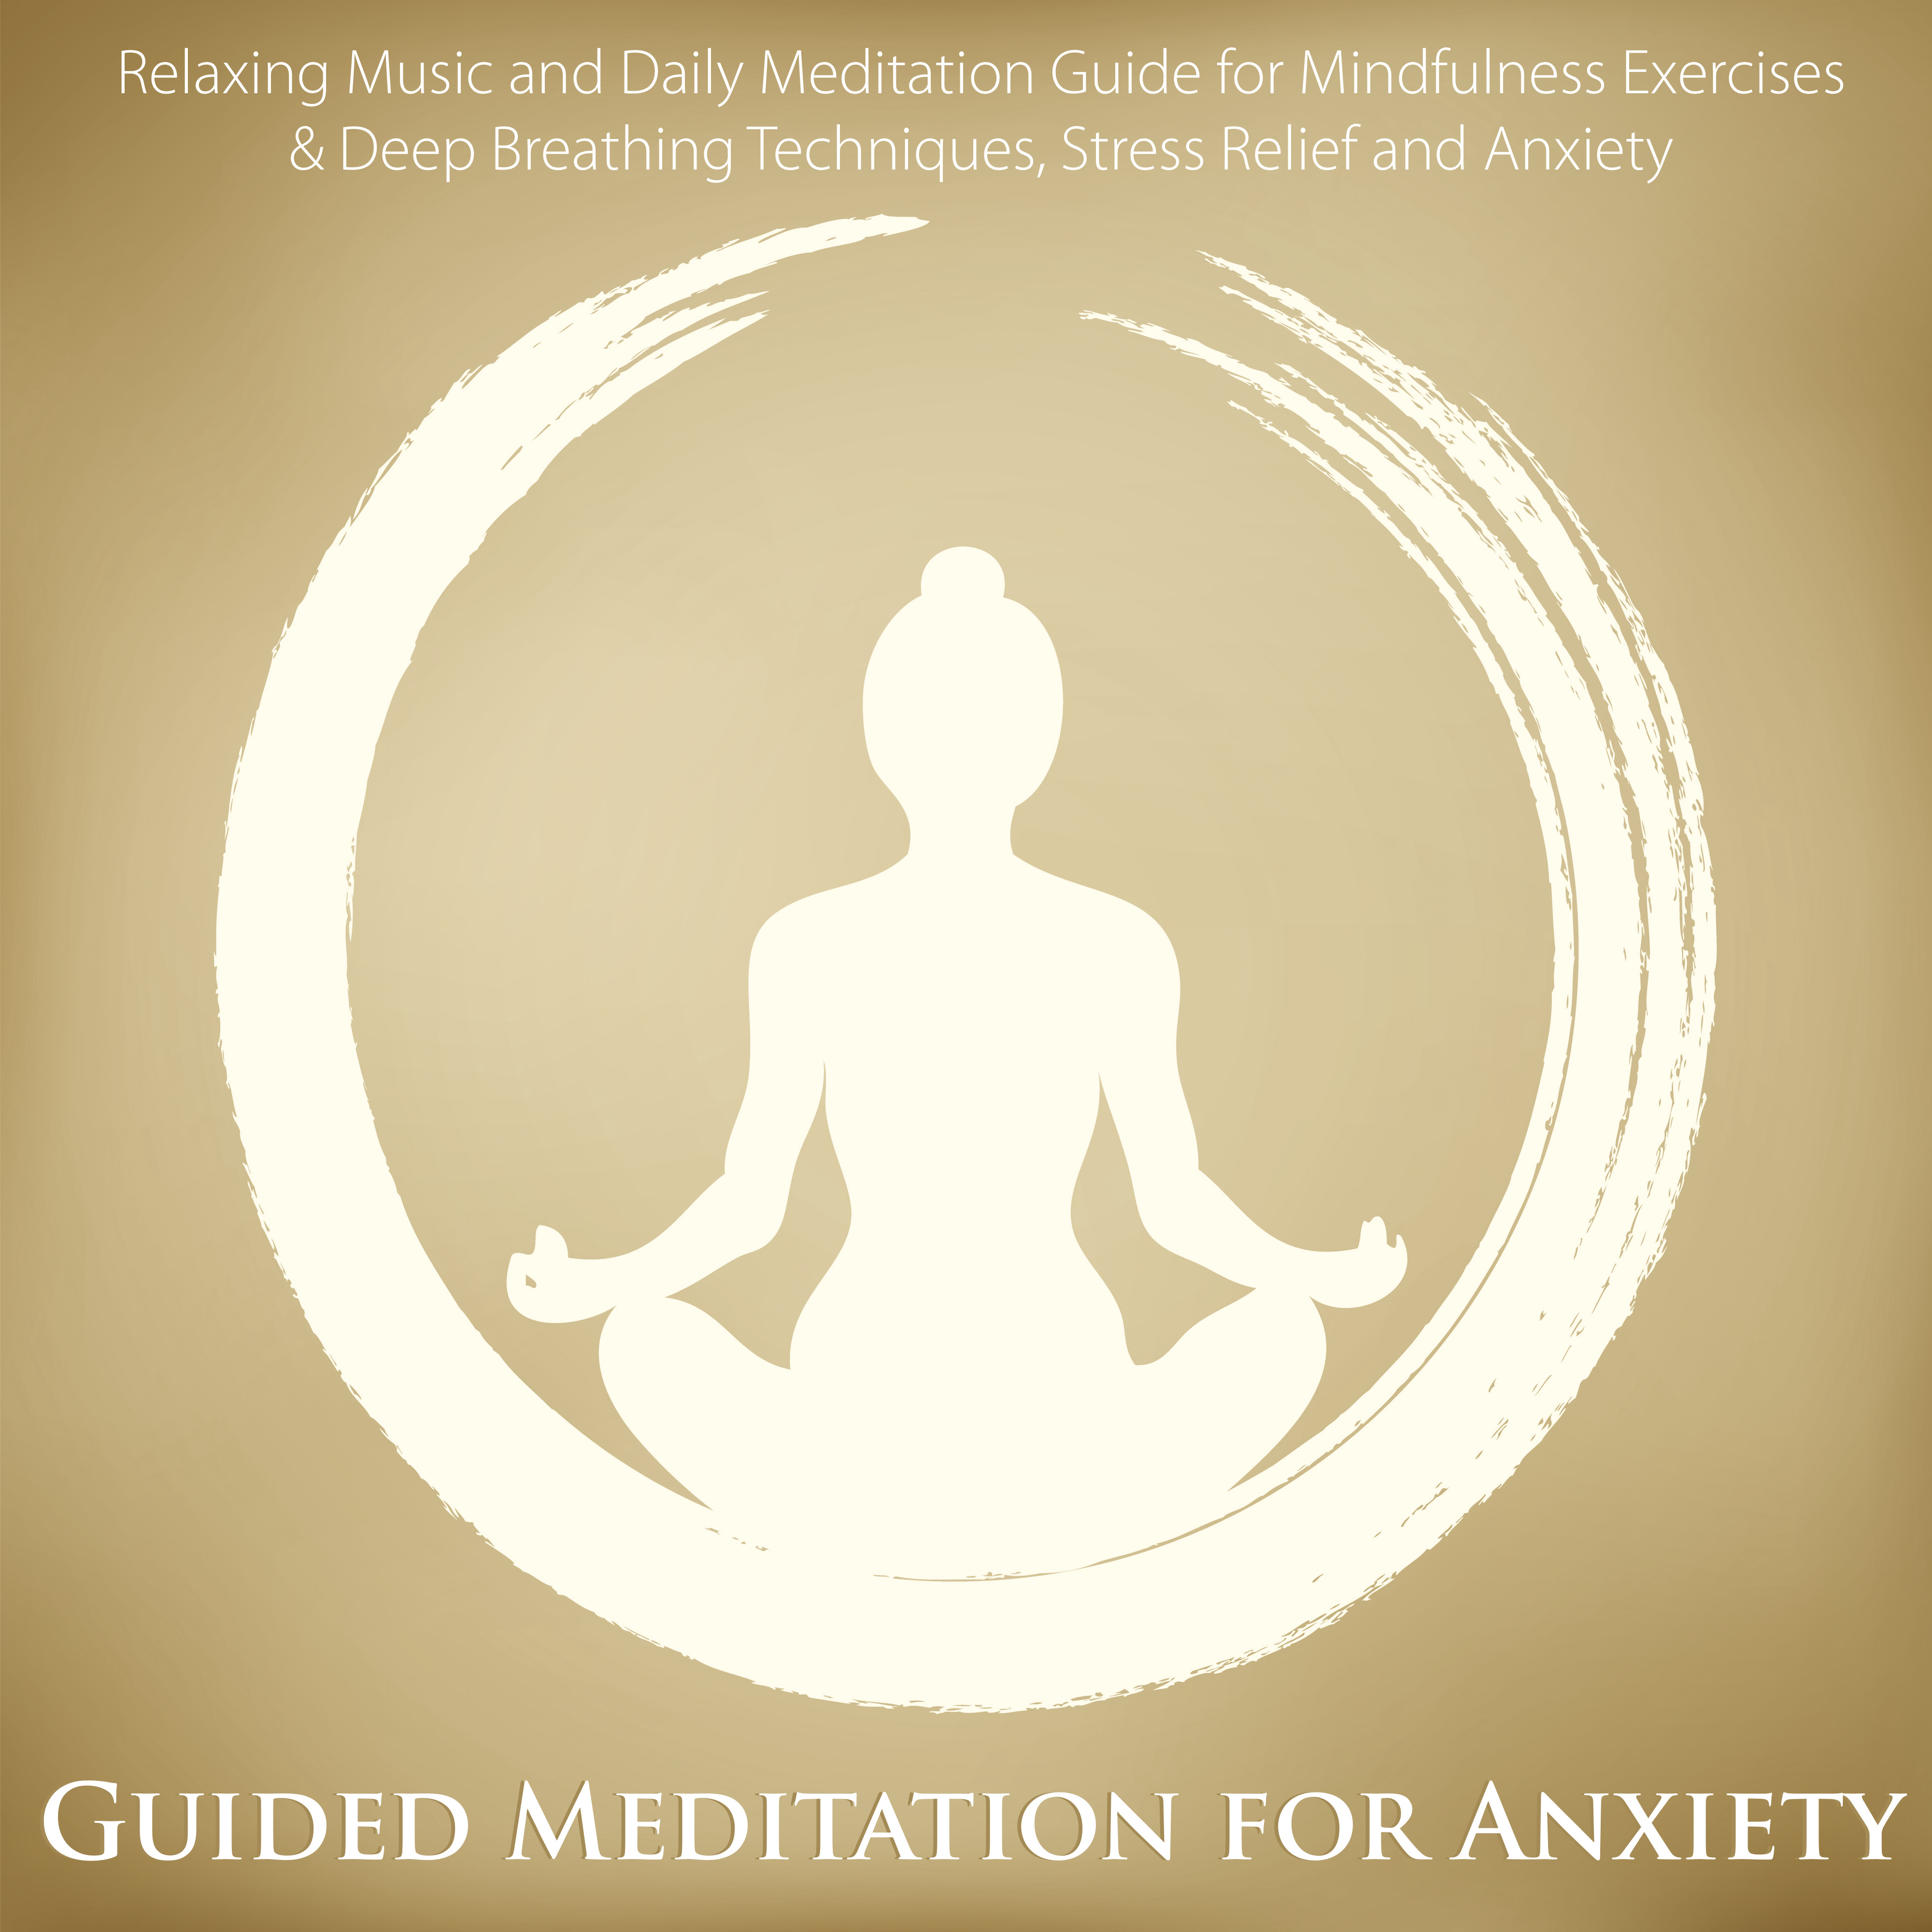 Guided Meditation for Anxiety - Relaxing Music and Daily Meditation Guide for Mindfulness Exercises & Deep Breathing Techniques, Stress Relief and Anxiety